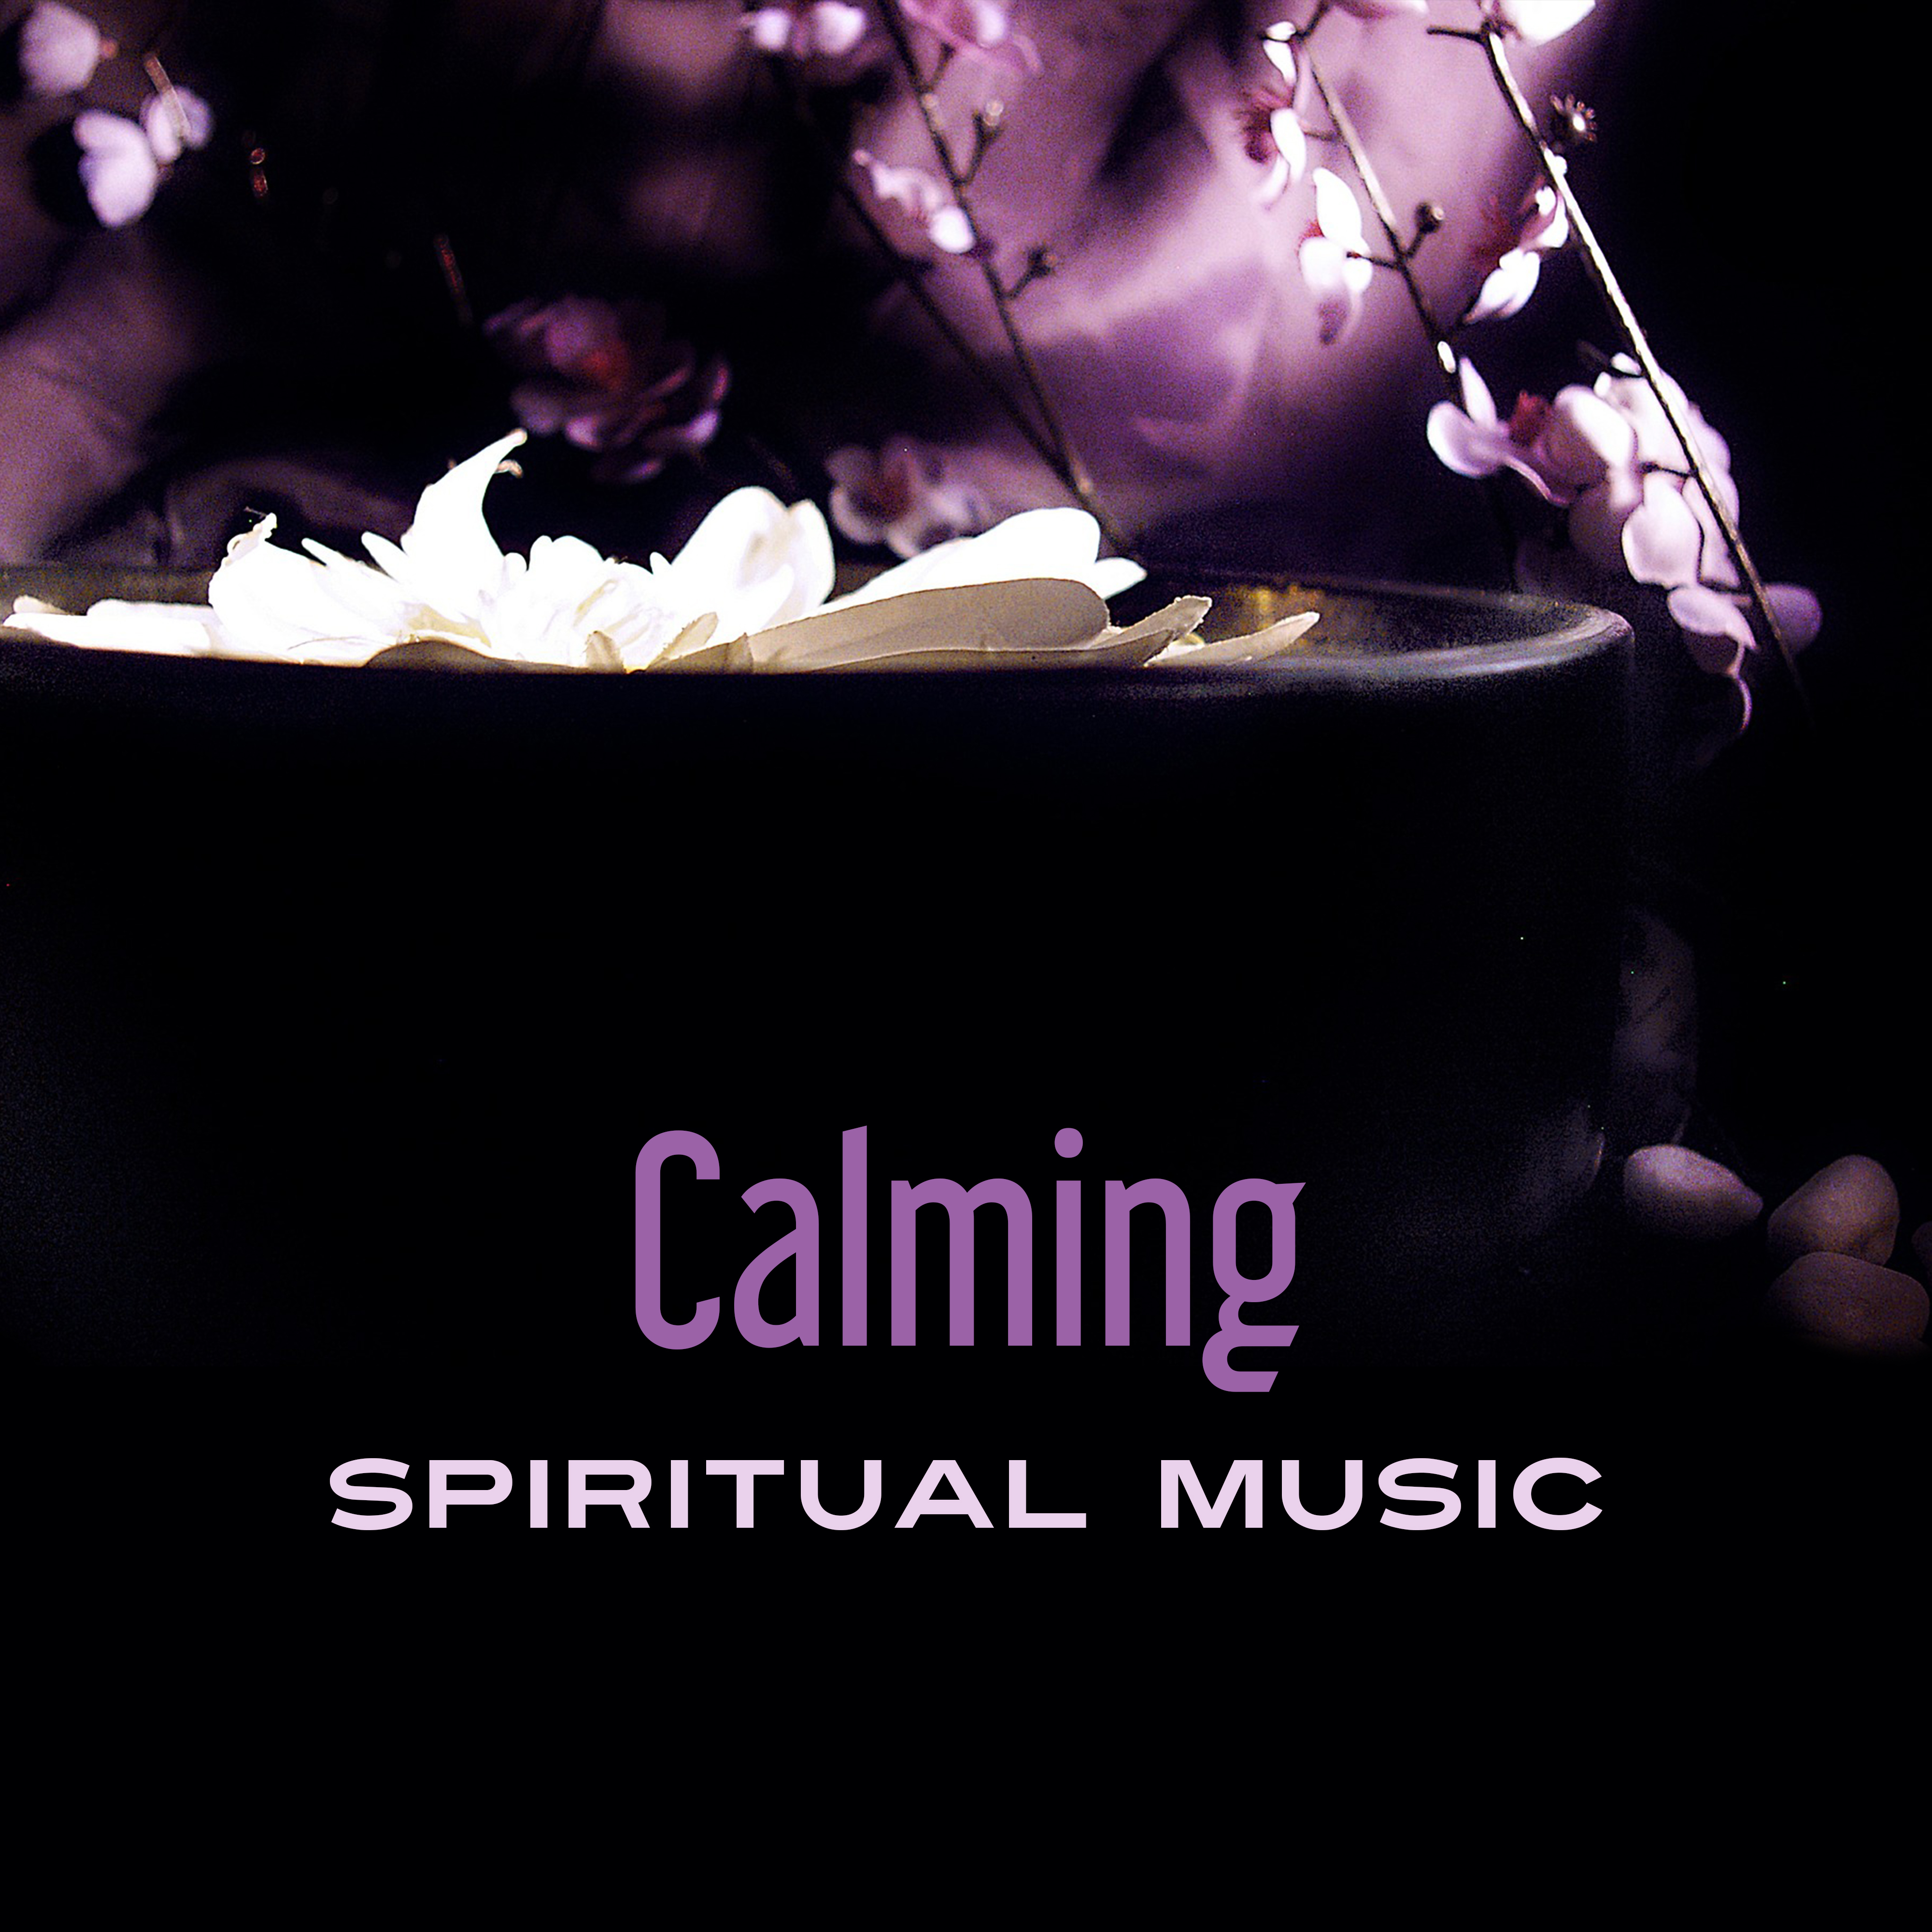 Calming Spiritual Music – Rest with New Age Music, Spirit Journey, Meditation Music, Sounds to Relax